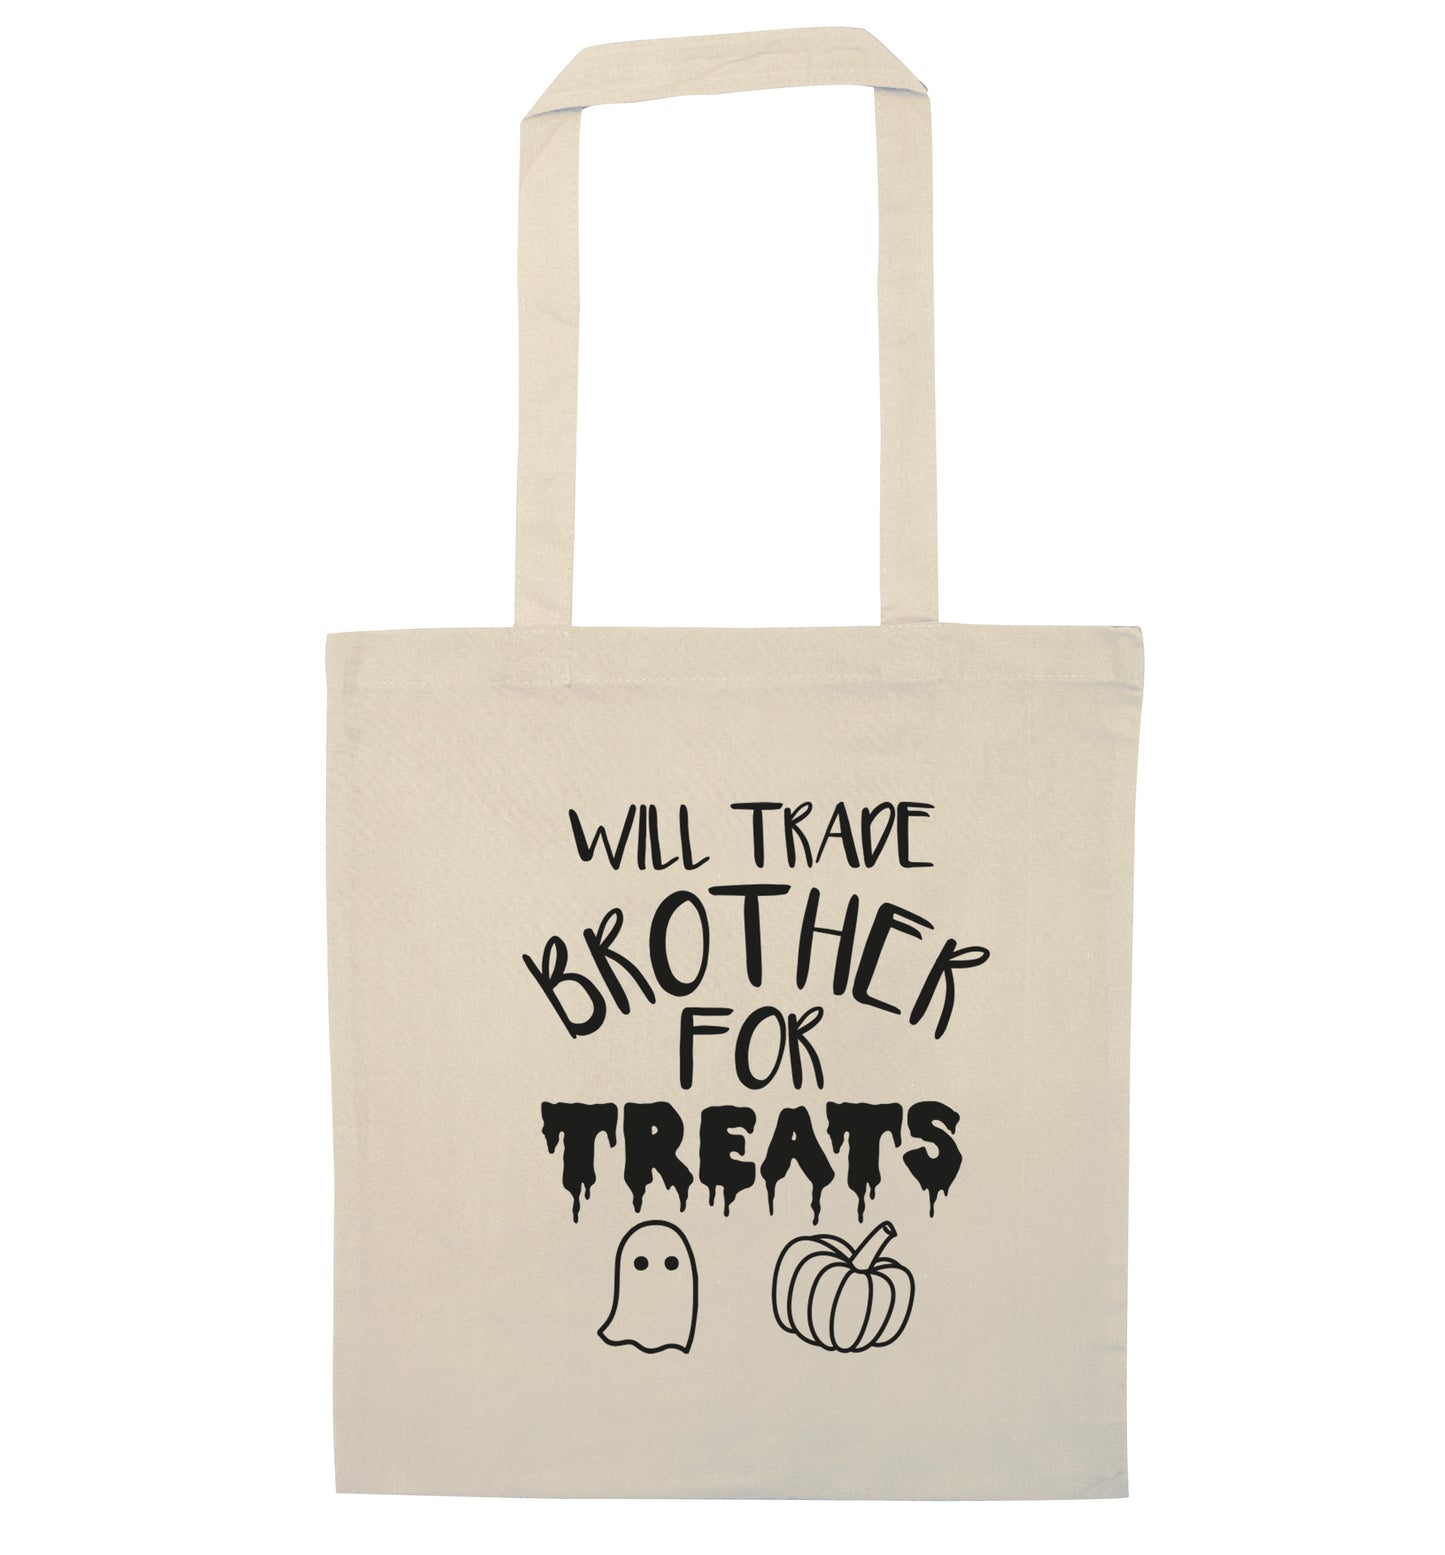 Will trade brother for sweets natural tote bag